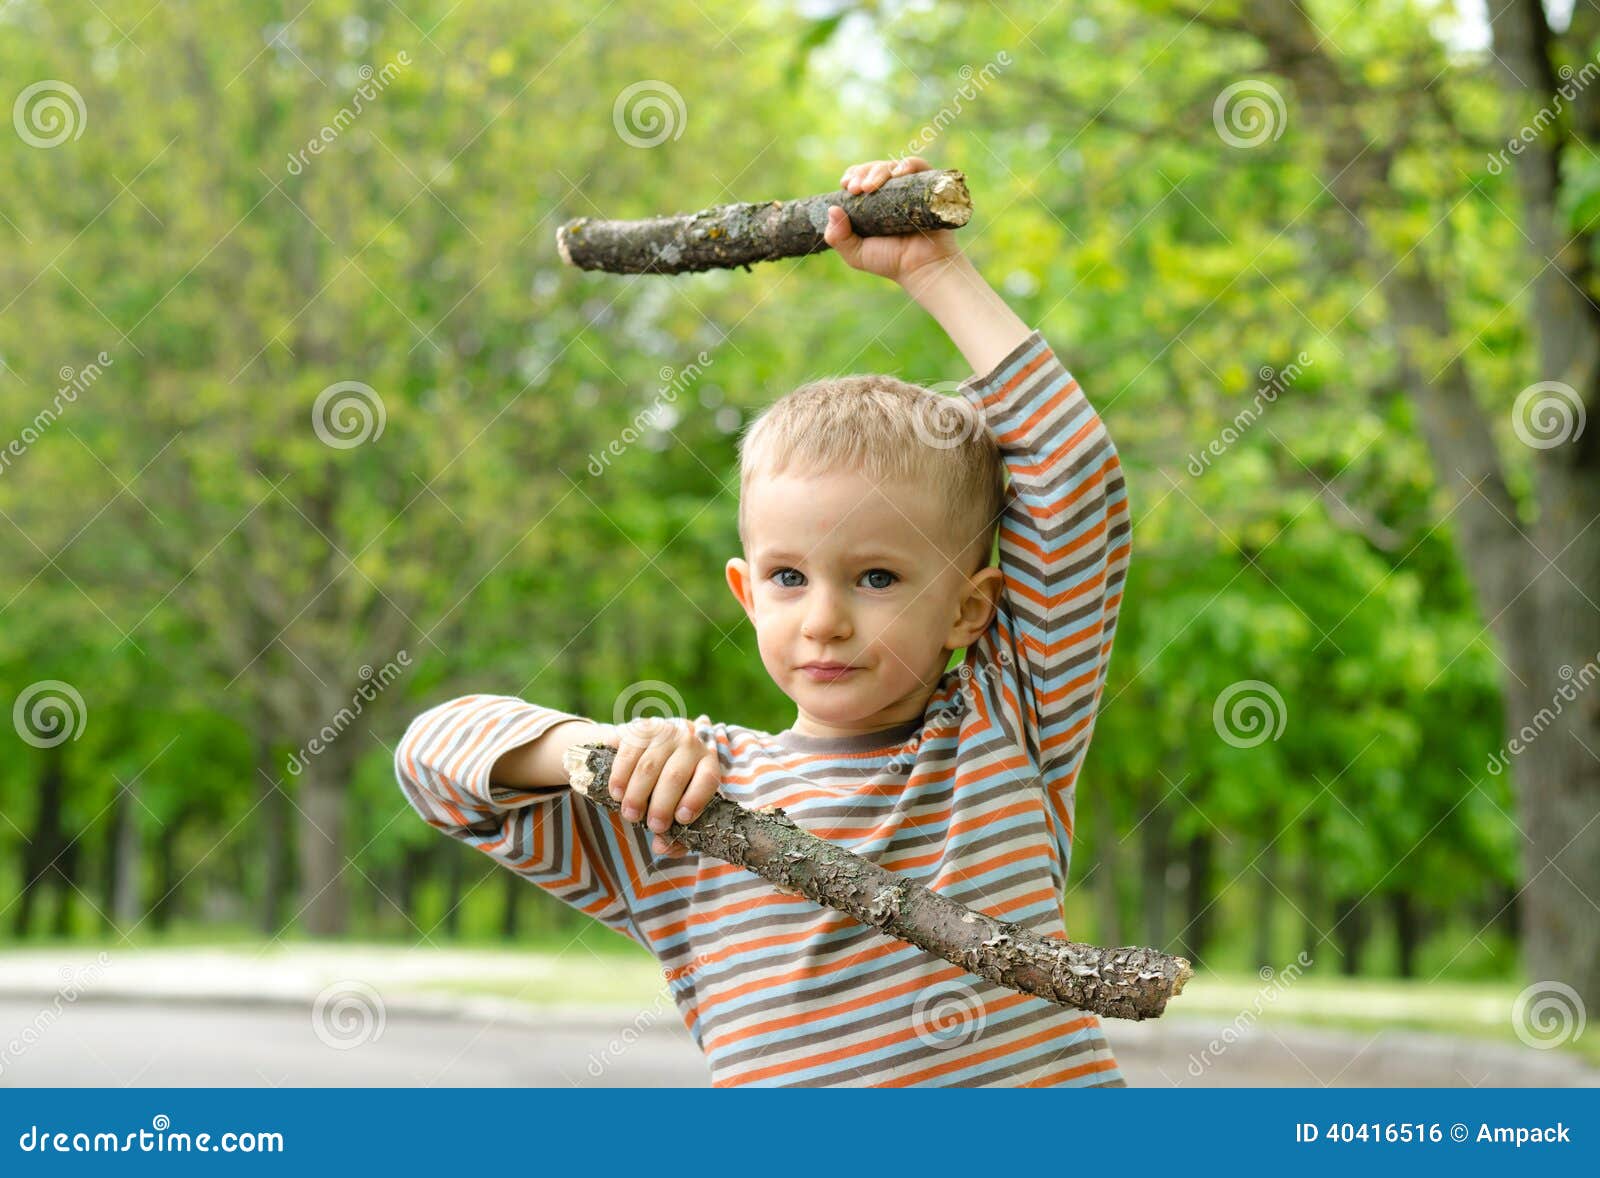 Stick Fighting Images – Browse 26,798 Stock Photos, Vectors, and Video